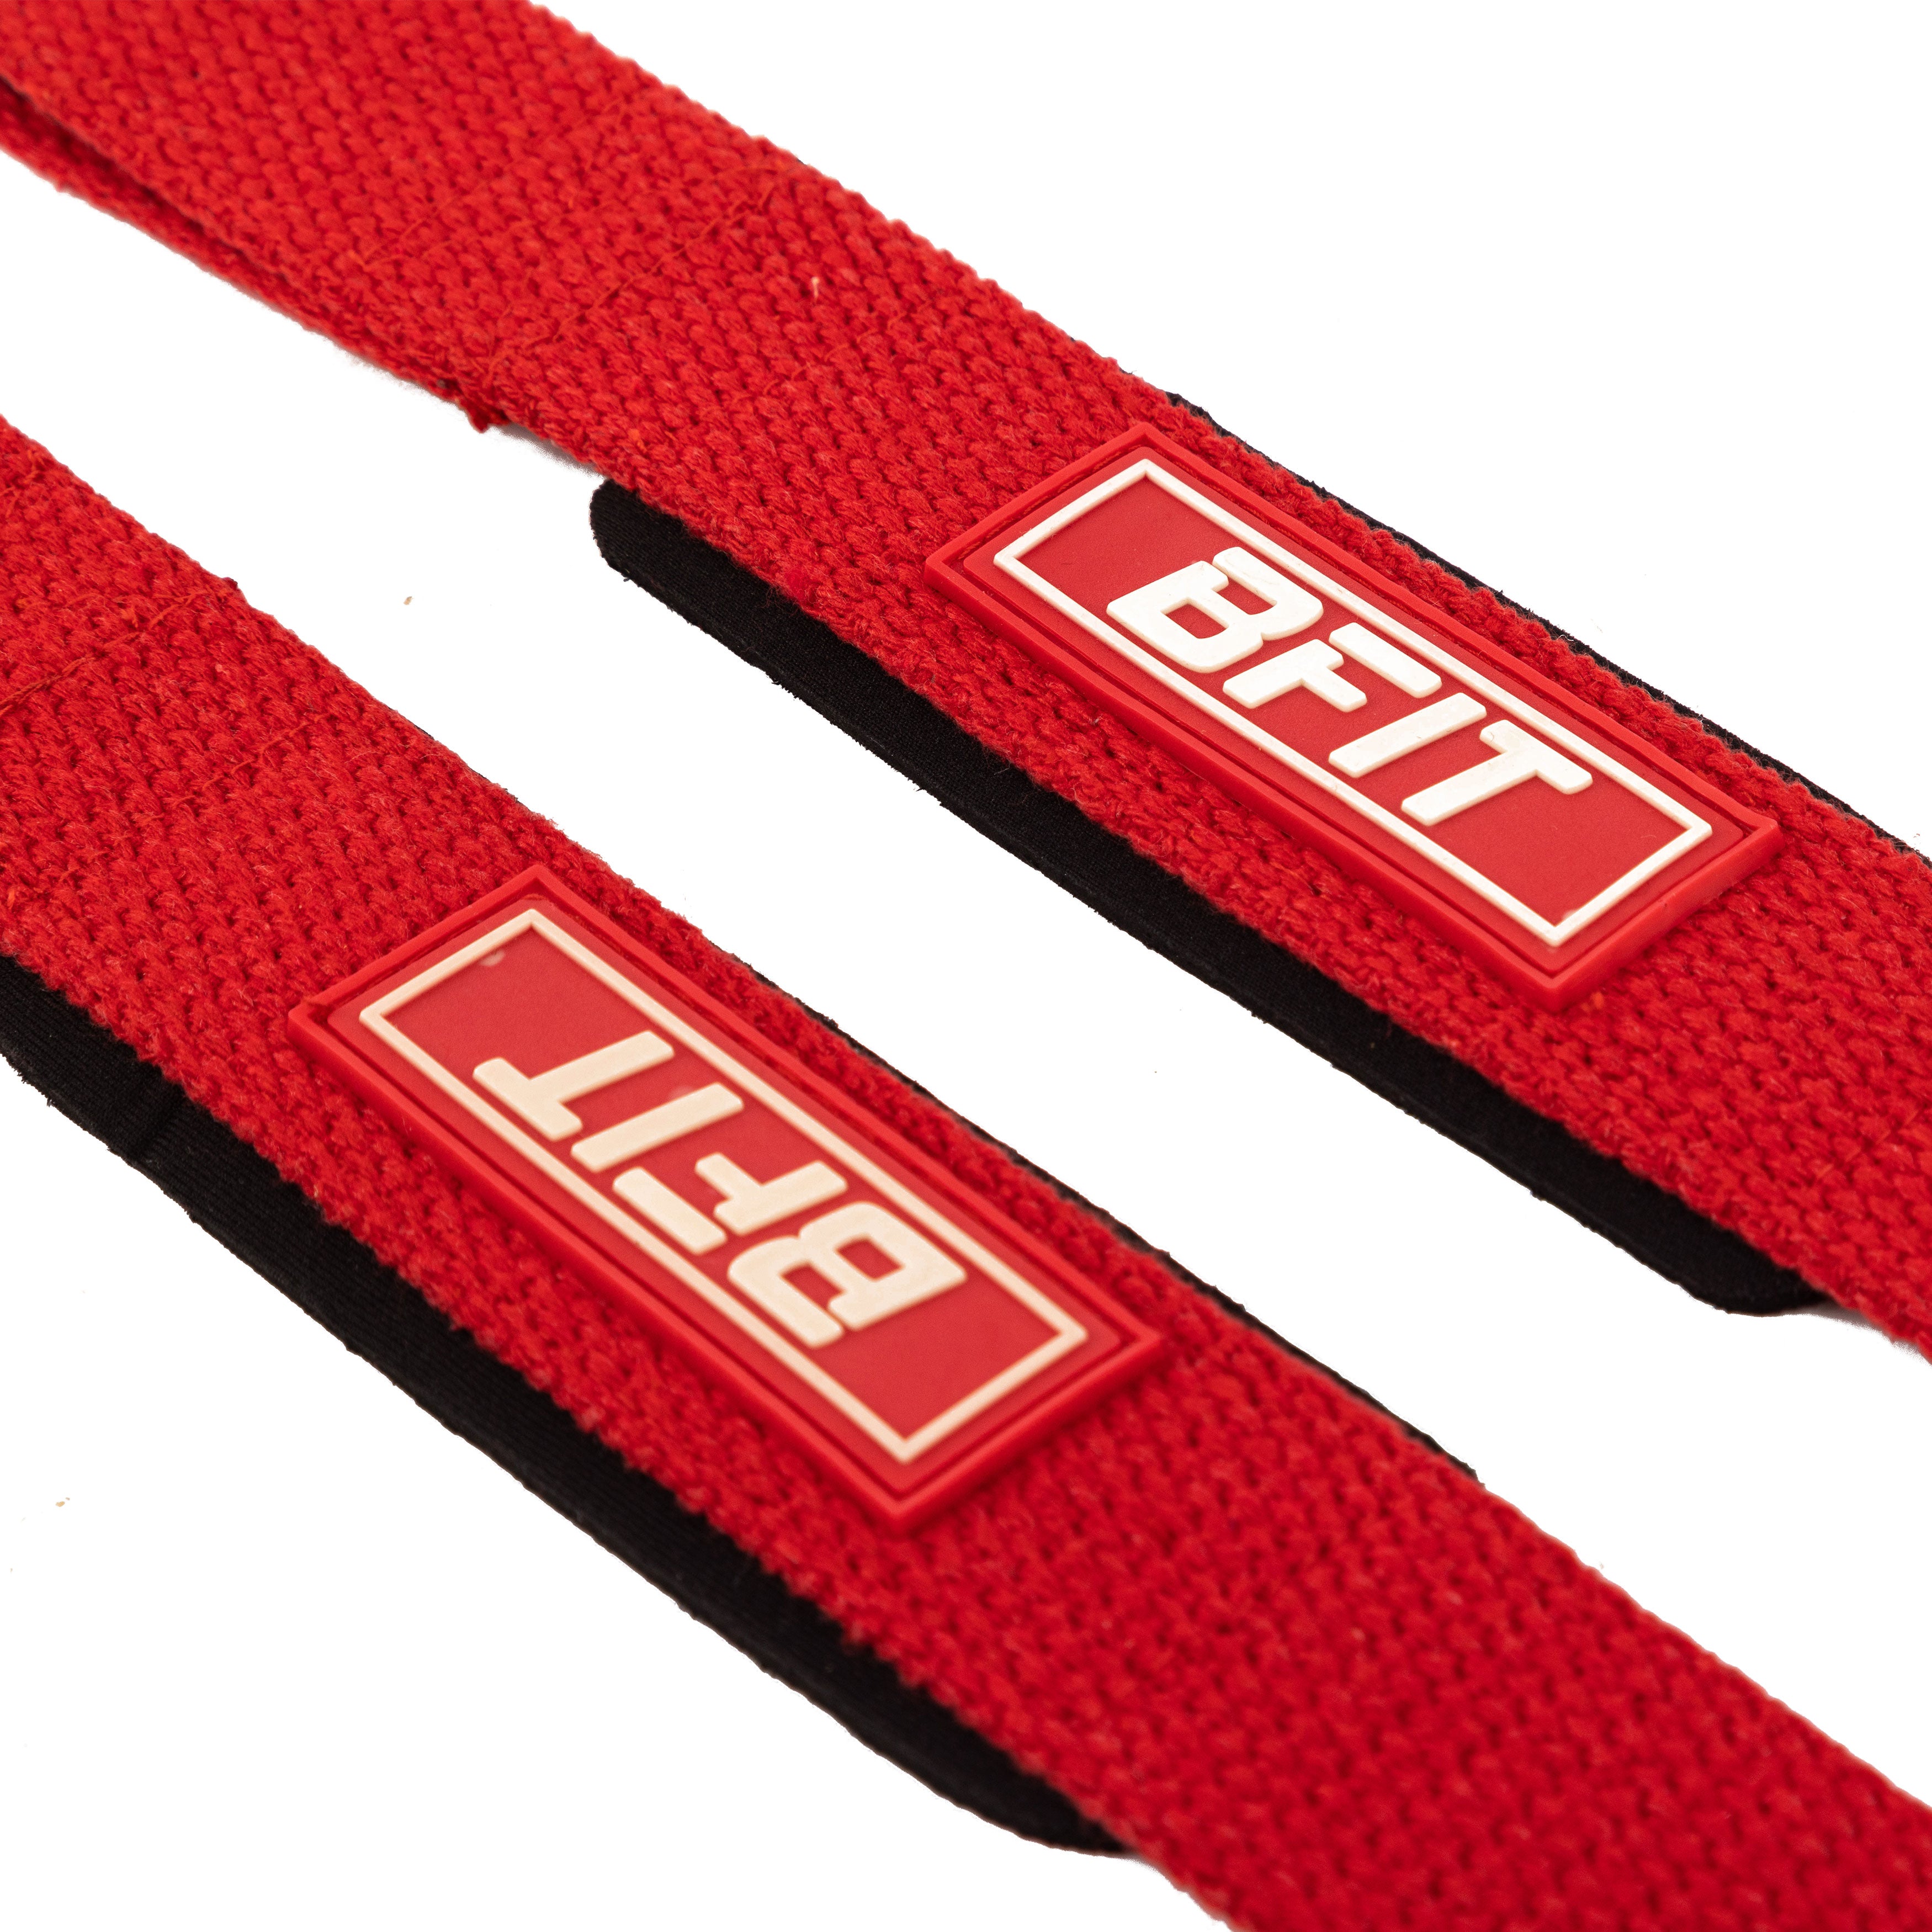 Bfit Lifting Strap - Red